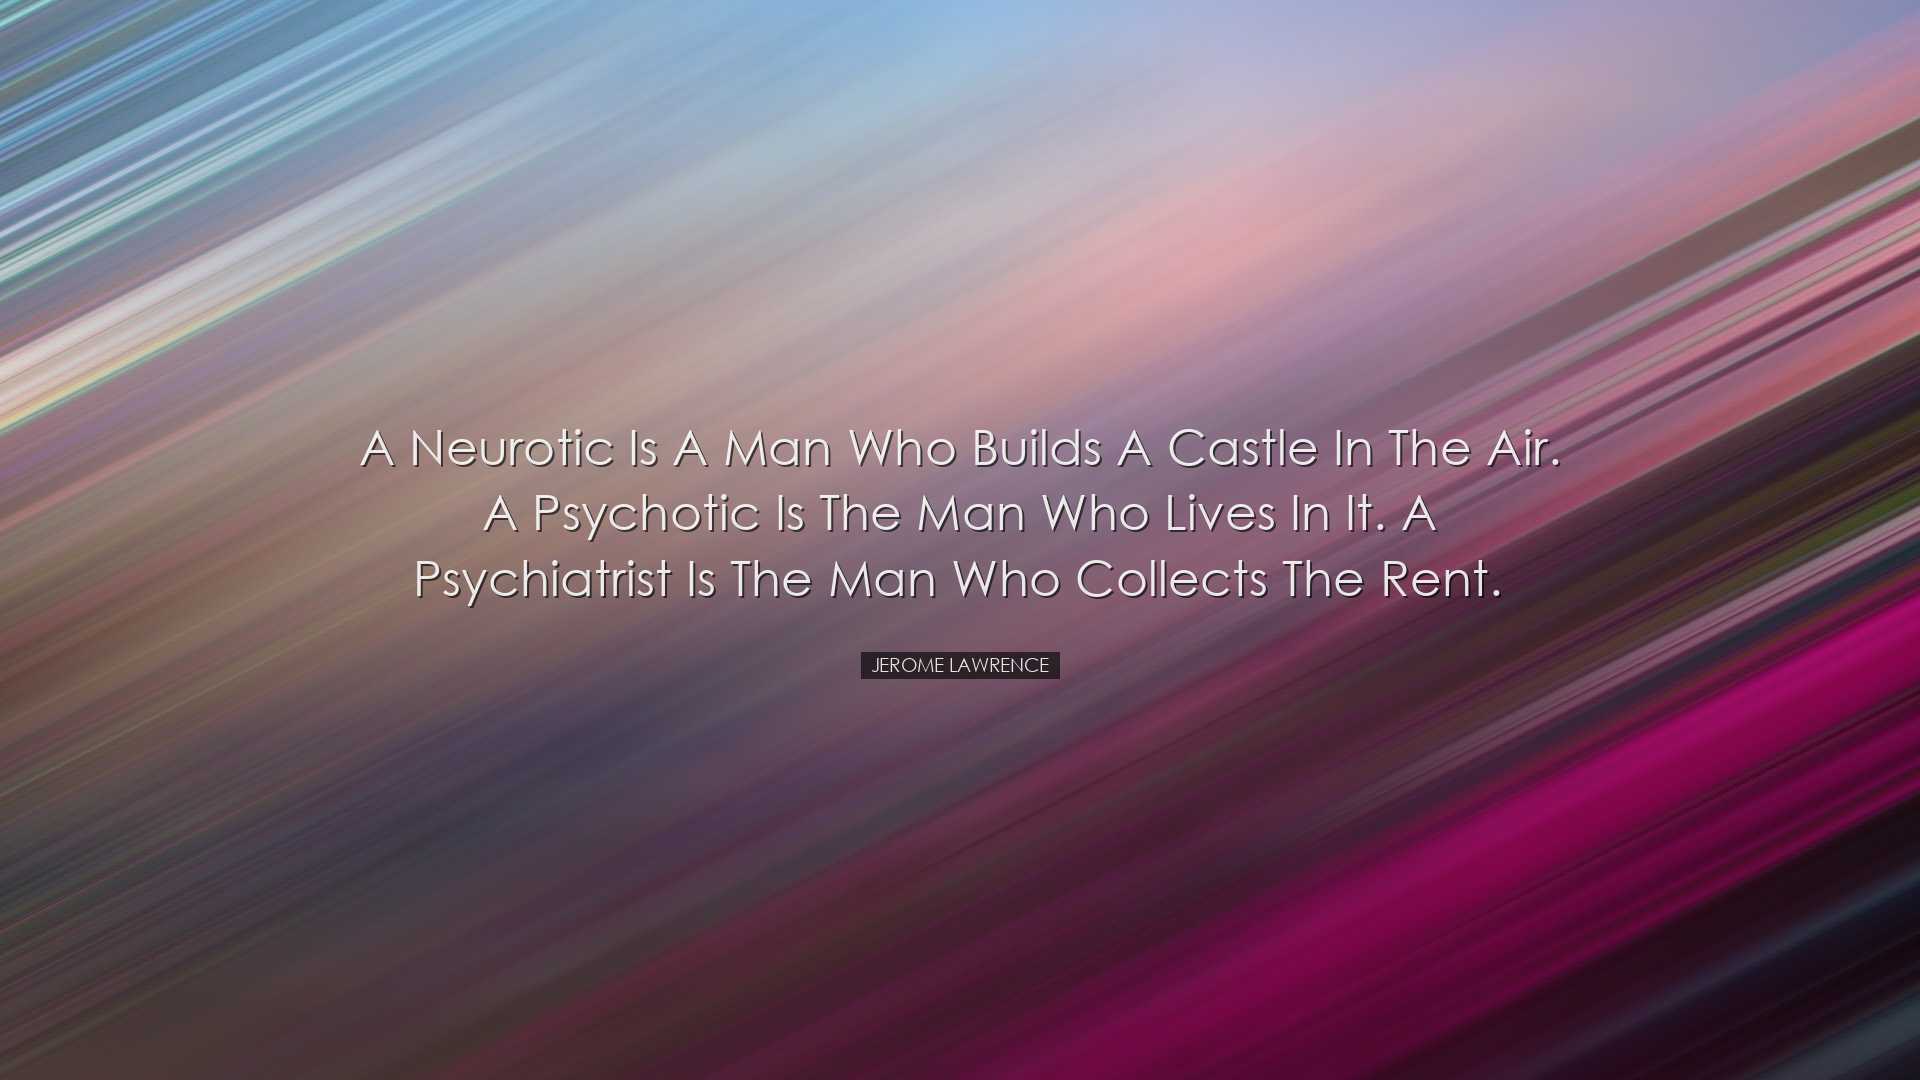 A neurotic is a man who builds a castle in the air. A psychotic is